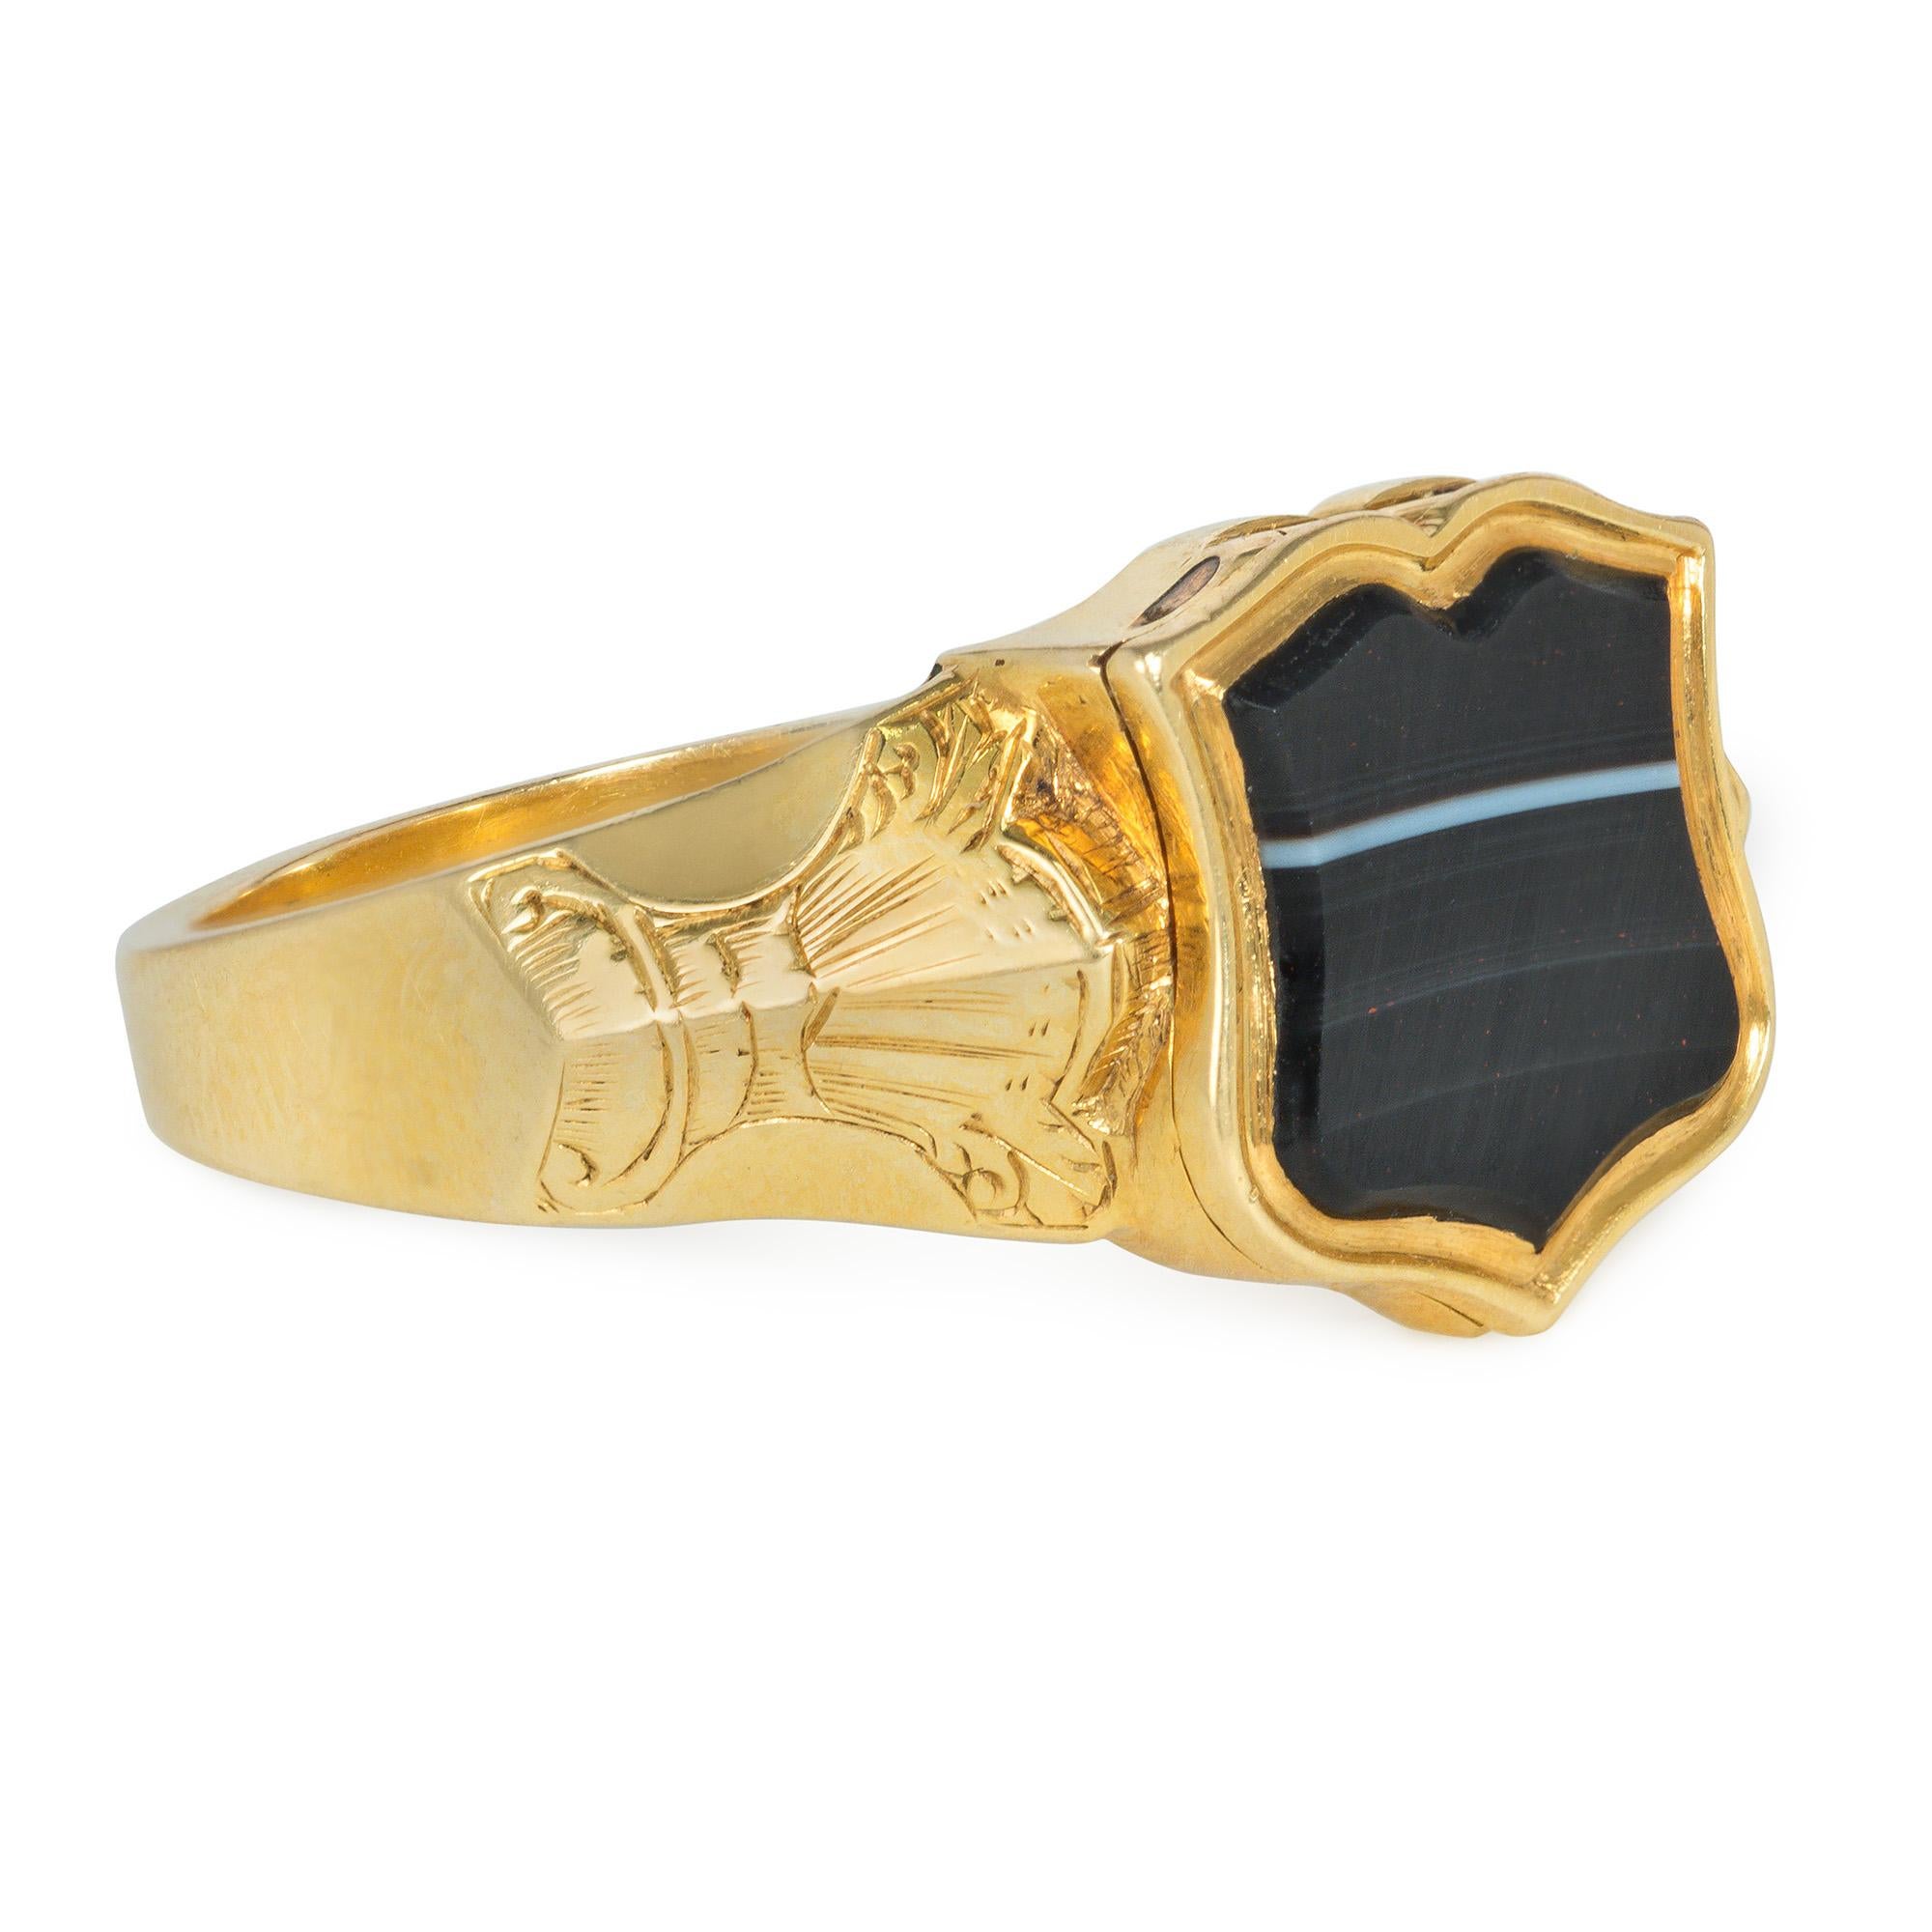 A Victorian gold poison ring set with a shield-shaped sardonyx plaque which opens to reveal a hidden compartment and interior locket in an engraved foliate mounting, in 18k. Inscribed and dated January 8, 1844

Center plaque measures approximately